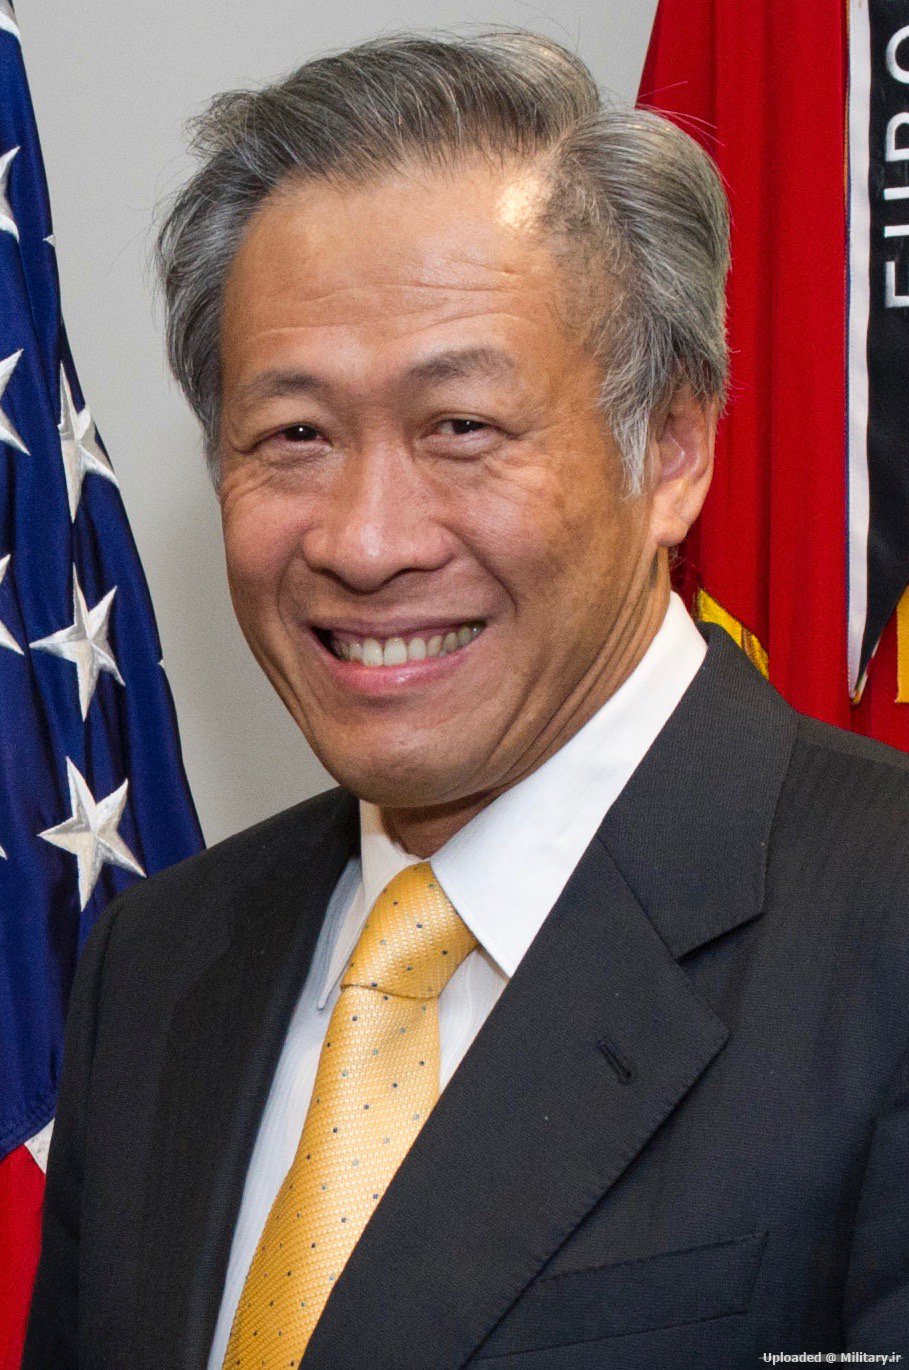 Singapore27s_Defence_Minister_Ng_Eng_Hen.jpg